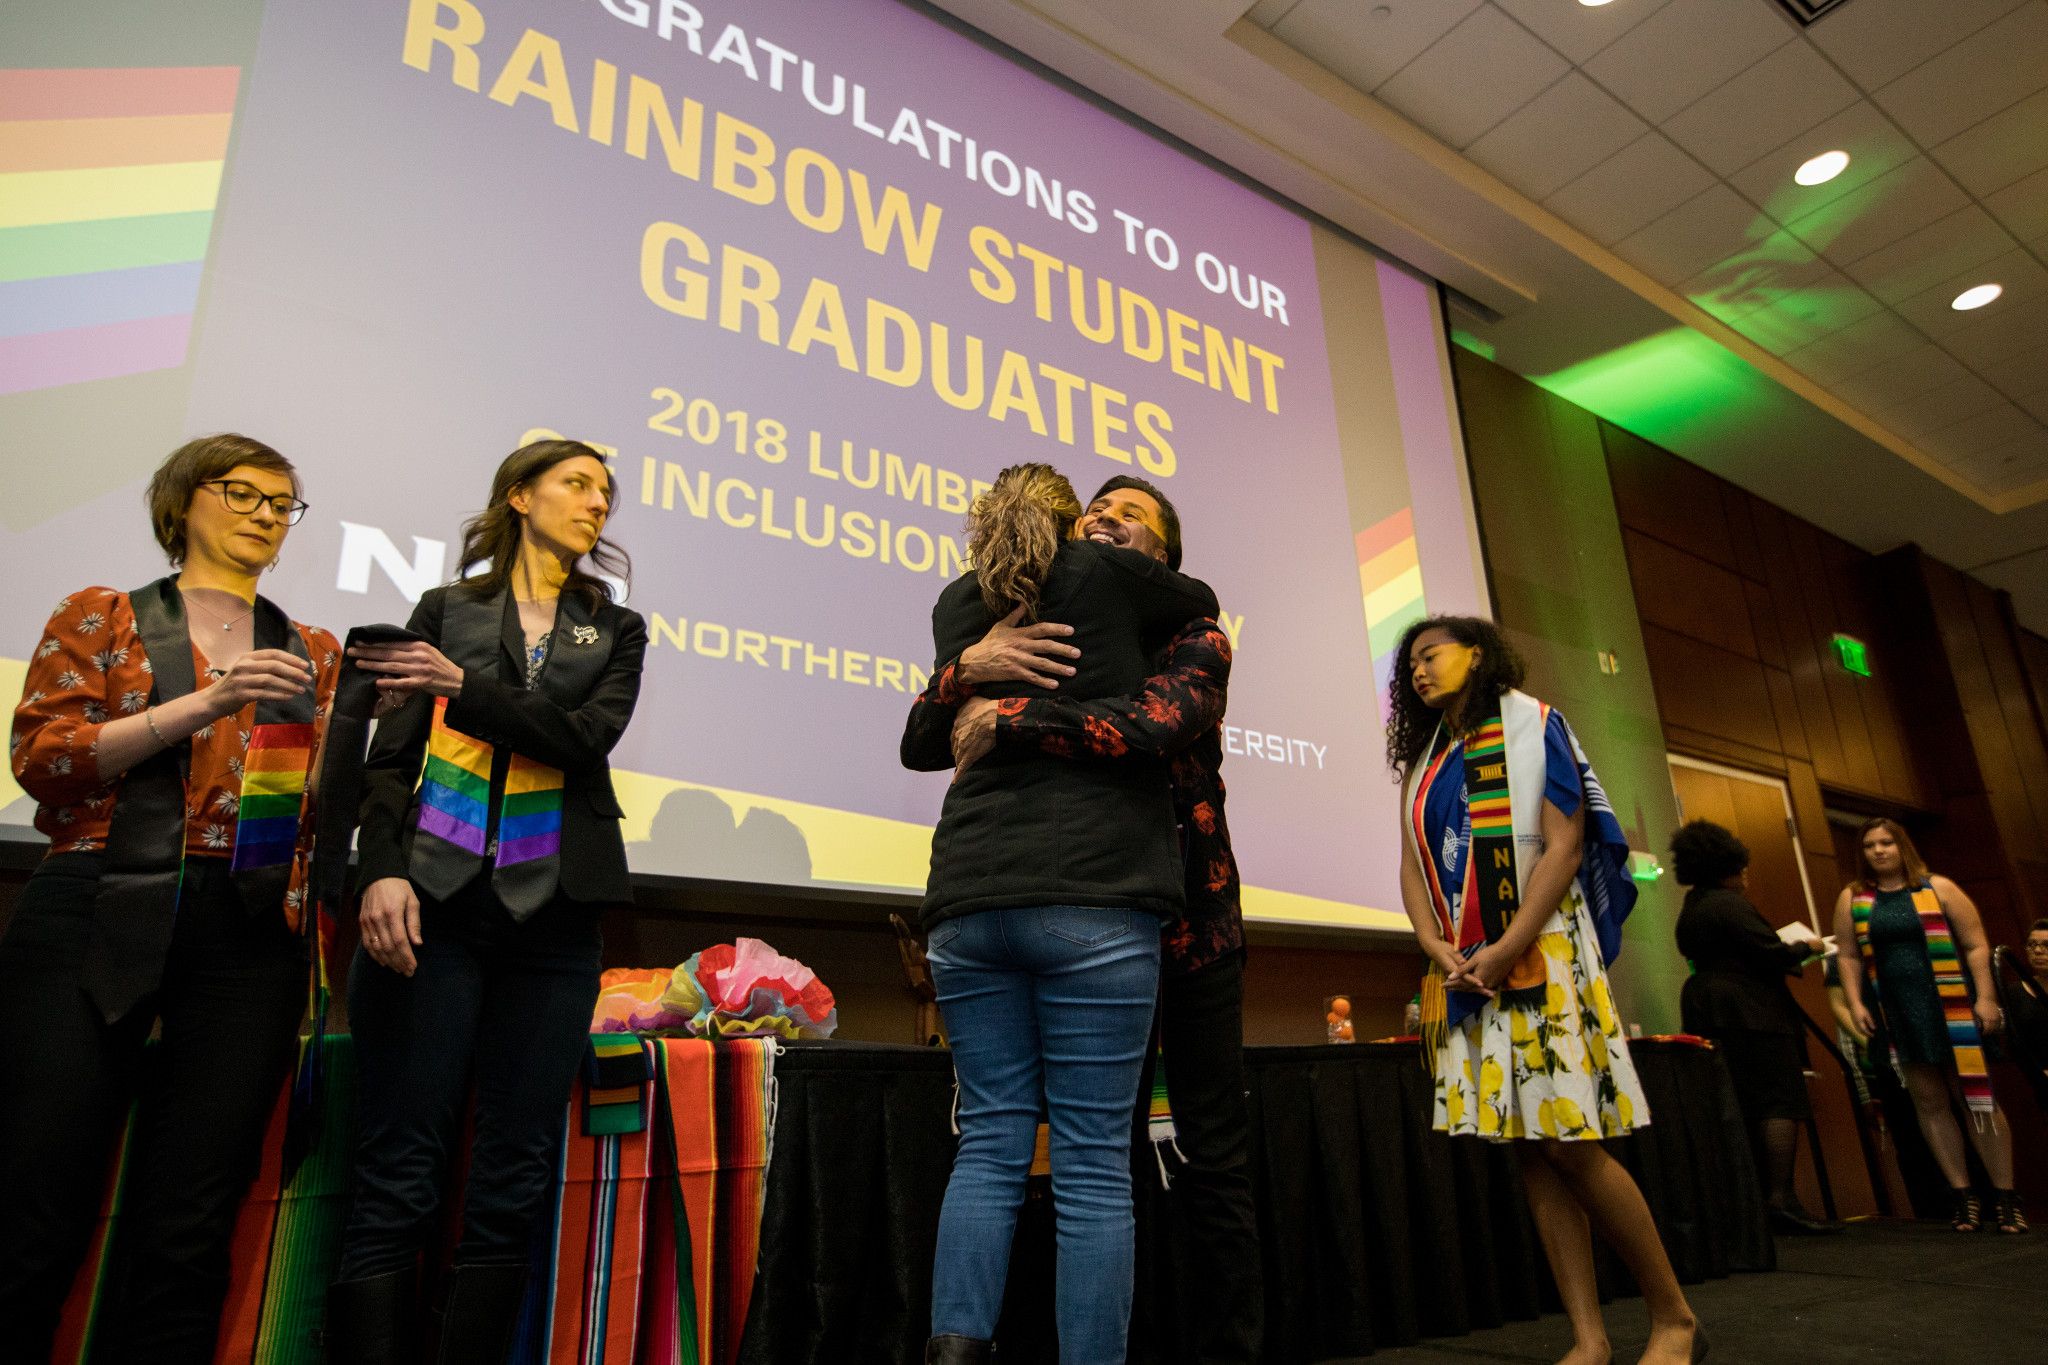 Rainbow convocation with students hugging.